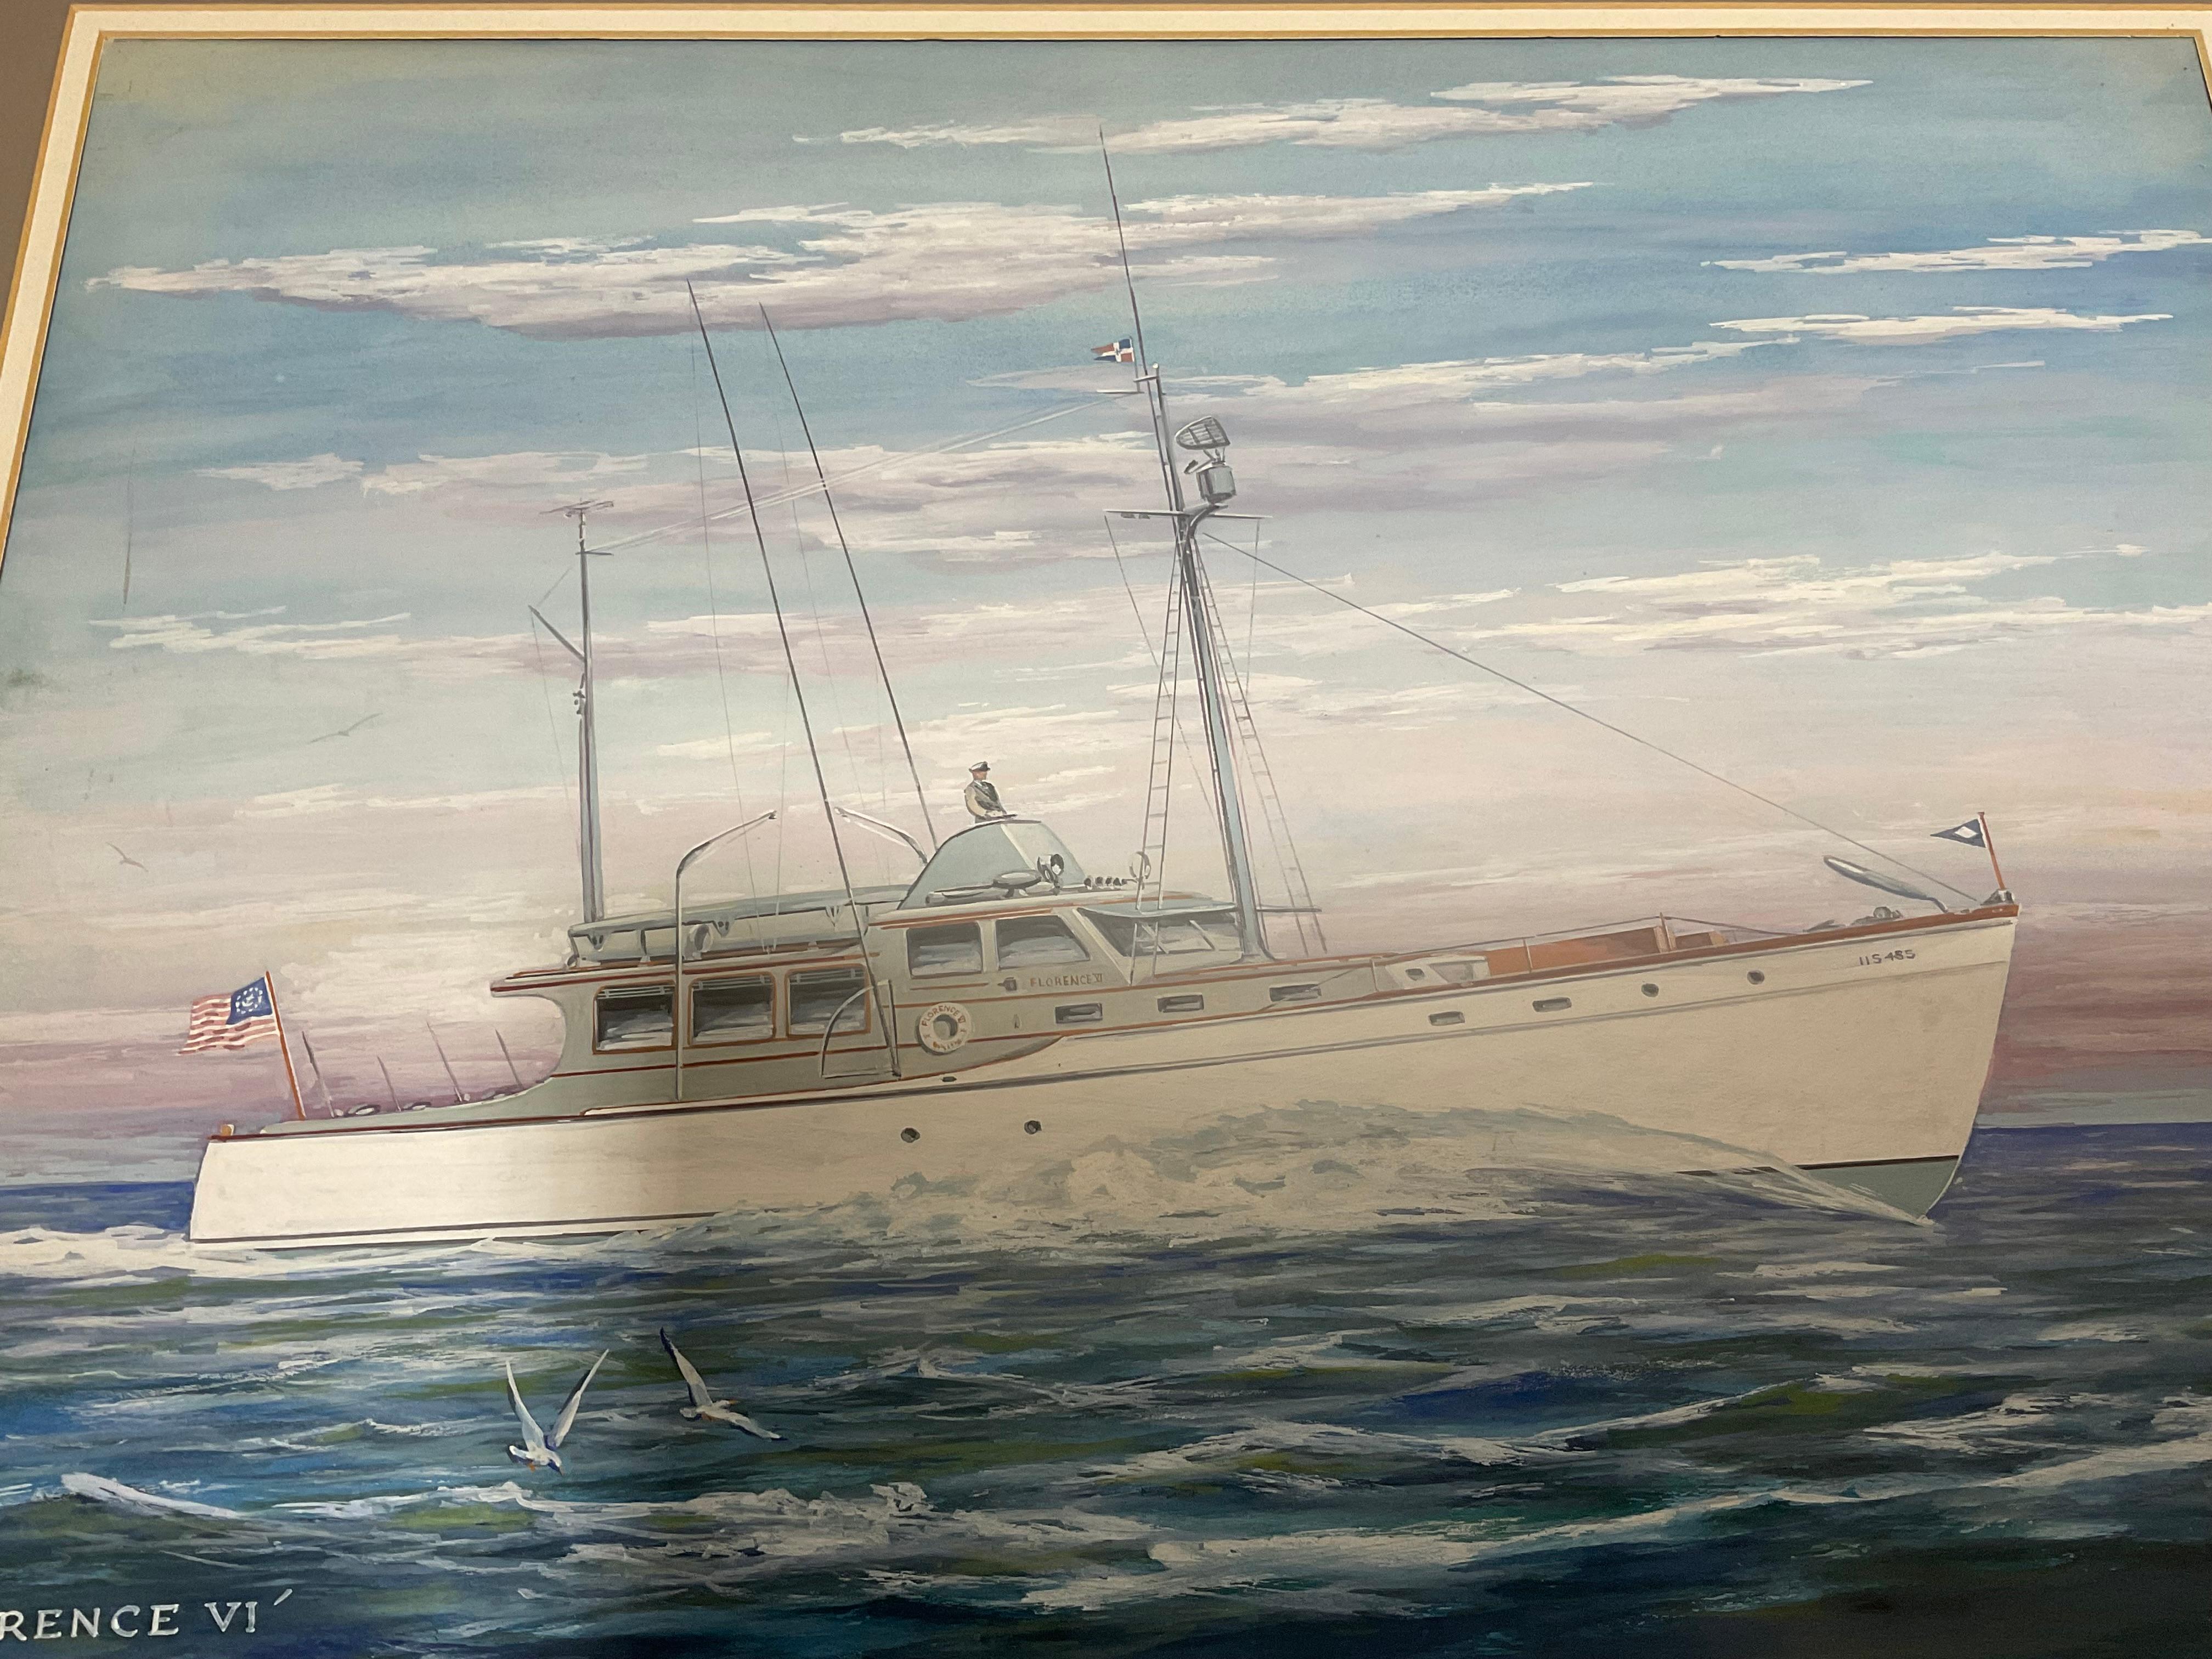 Sportfishing Boat Painting By John Austin Taylor In Good Condition For Sale In Norwell, MA